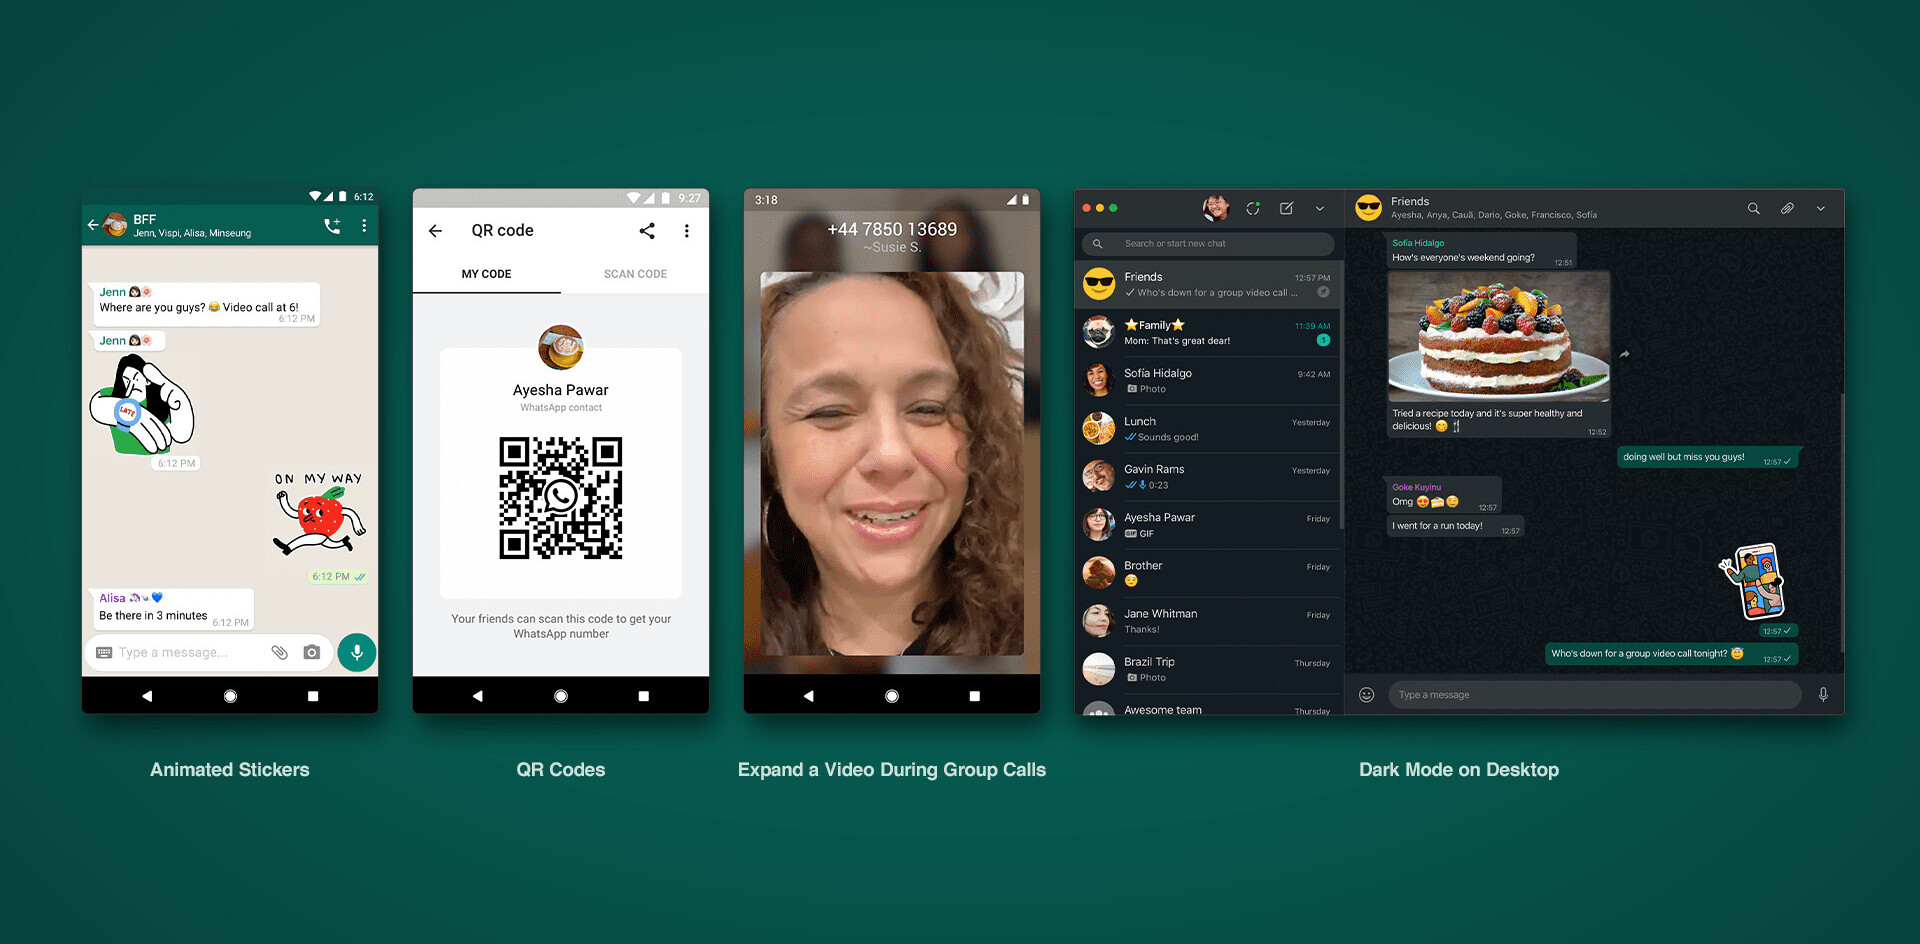 WhatsApp officially announces QR codes and animated stickers